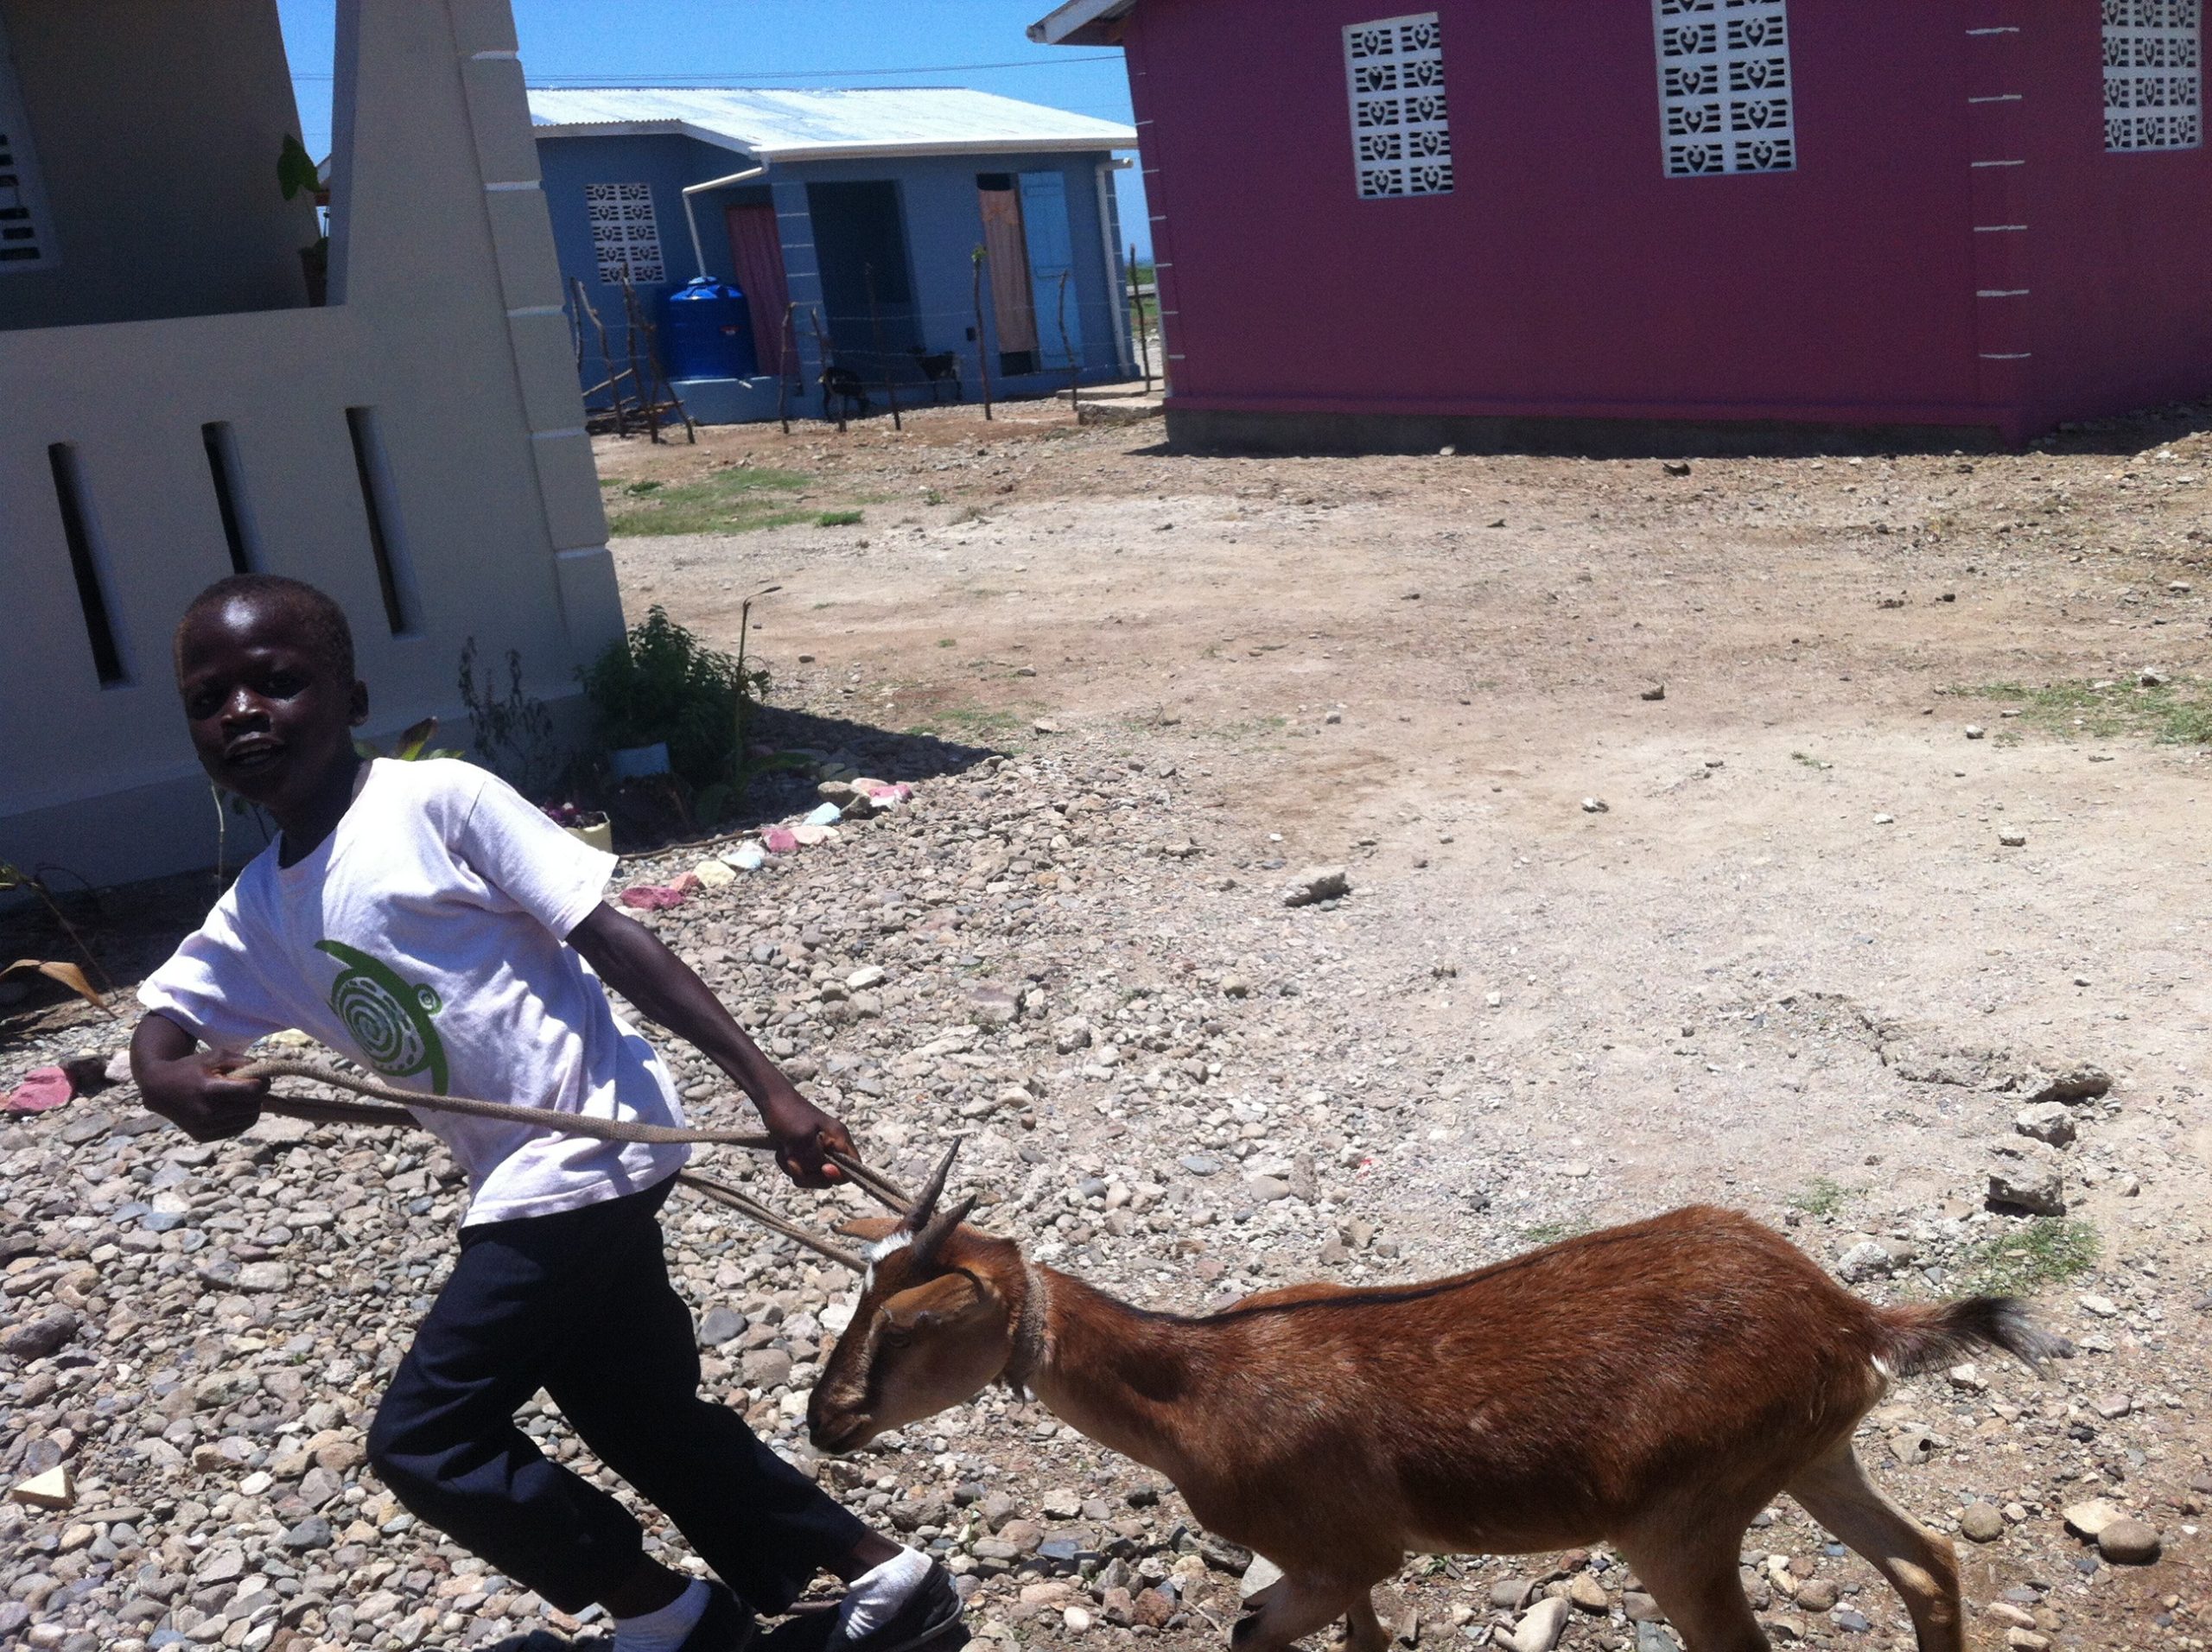 Tales from Haiti: A boy and his stubborn goat